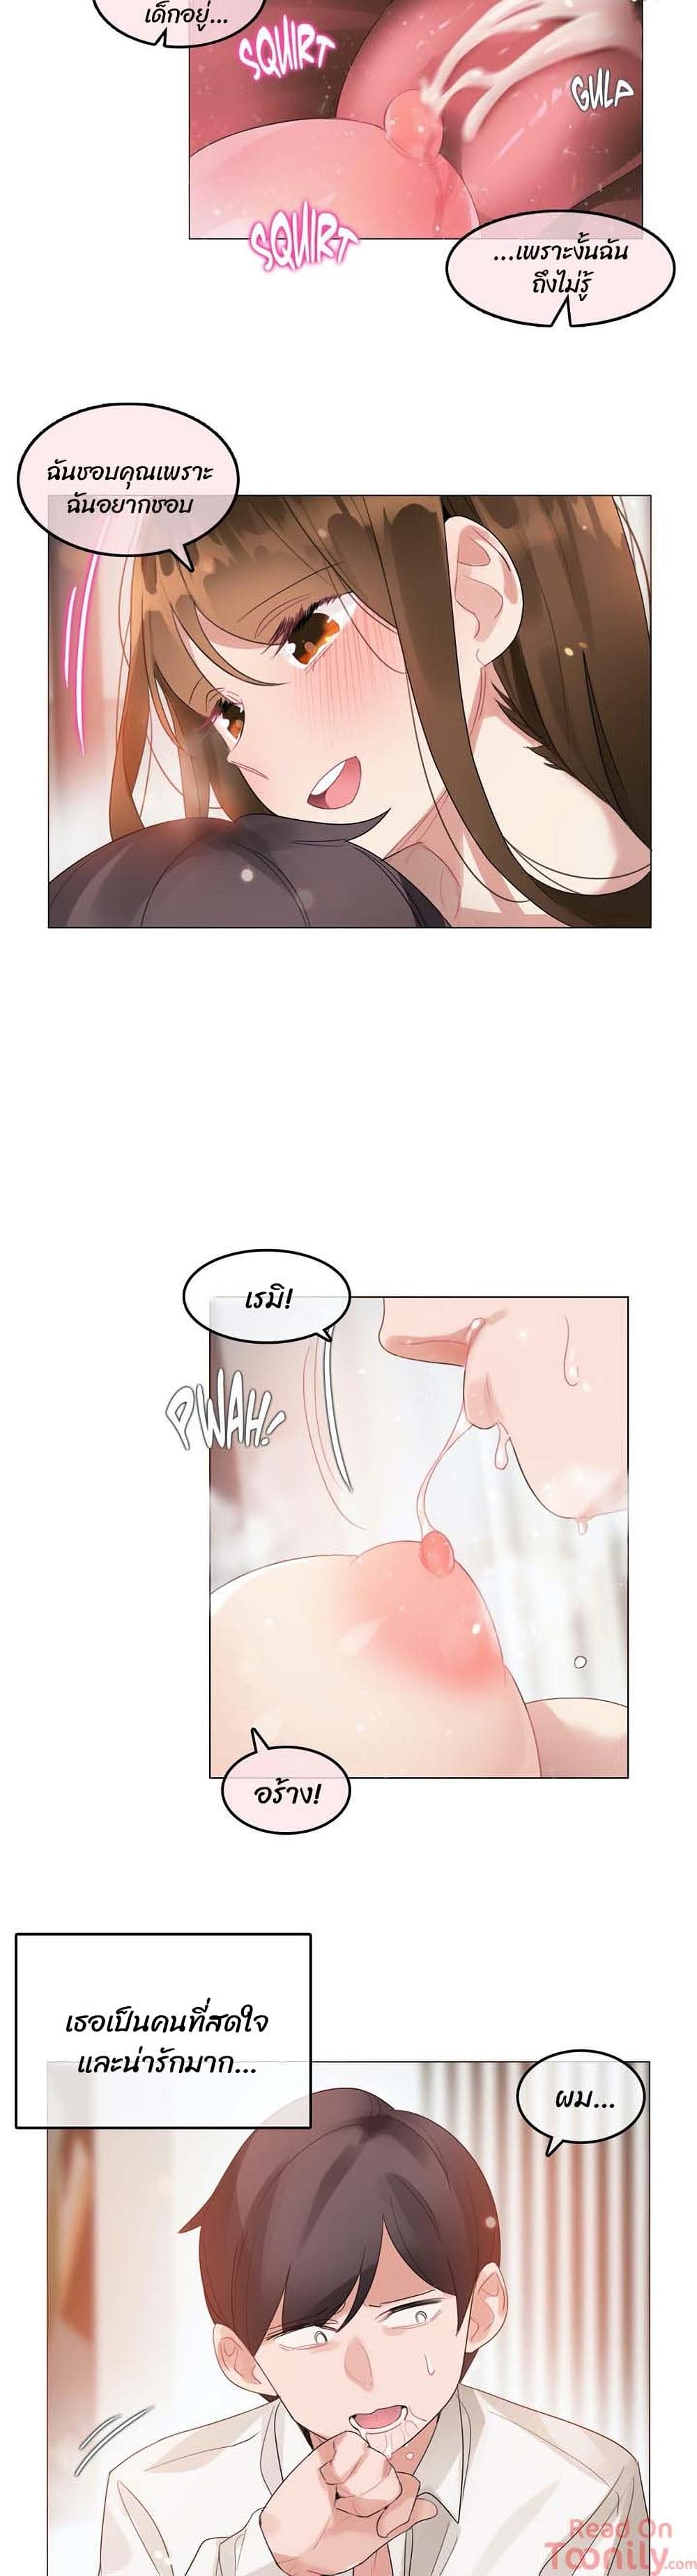 A Pervert's Daily Life 81 (11)